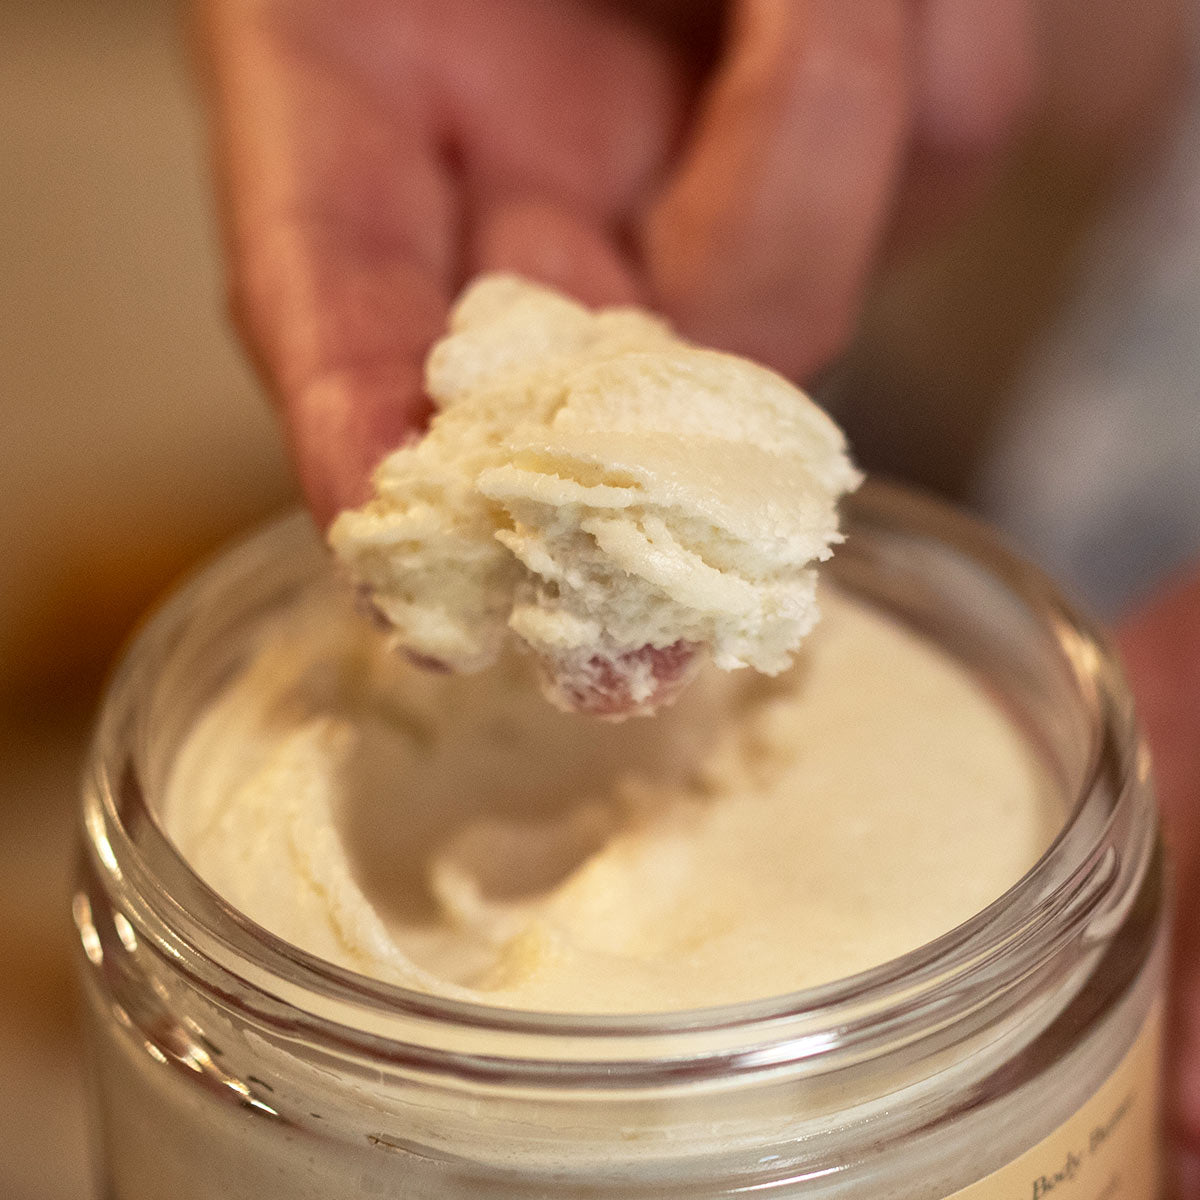 clump of neroli frankincense shea butter on fingertips extracted from jar